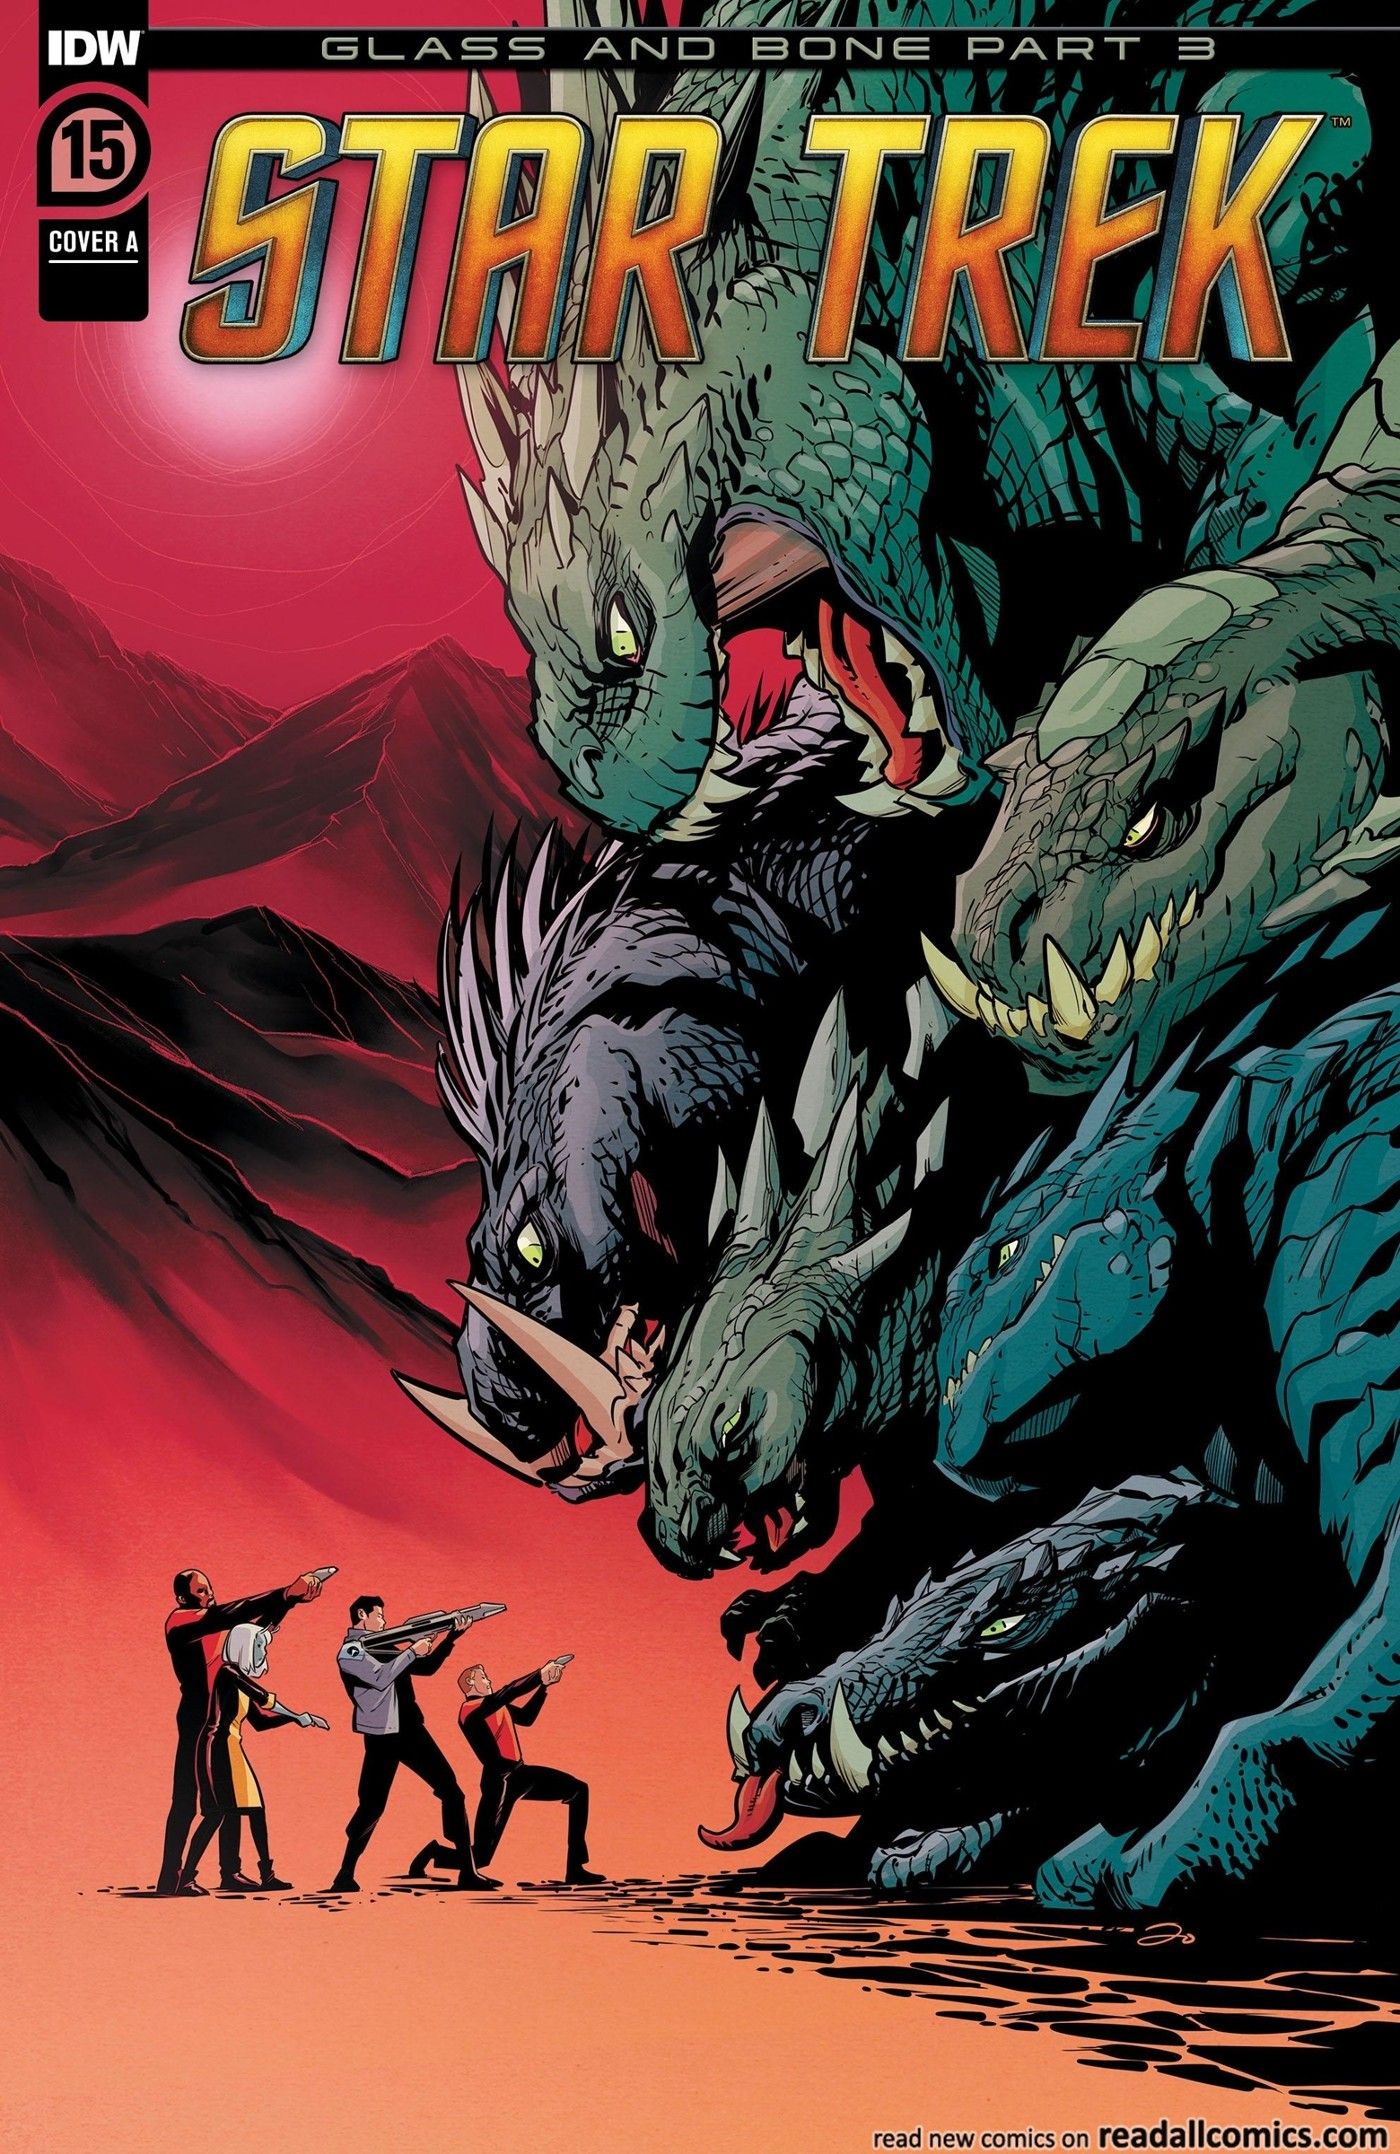 Cover featuring an away team threatend by the Tzenkethi, who are large dinosaurs.